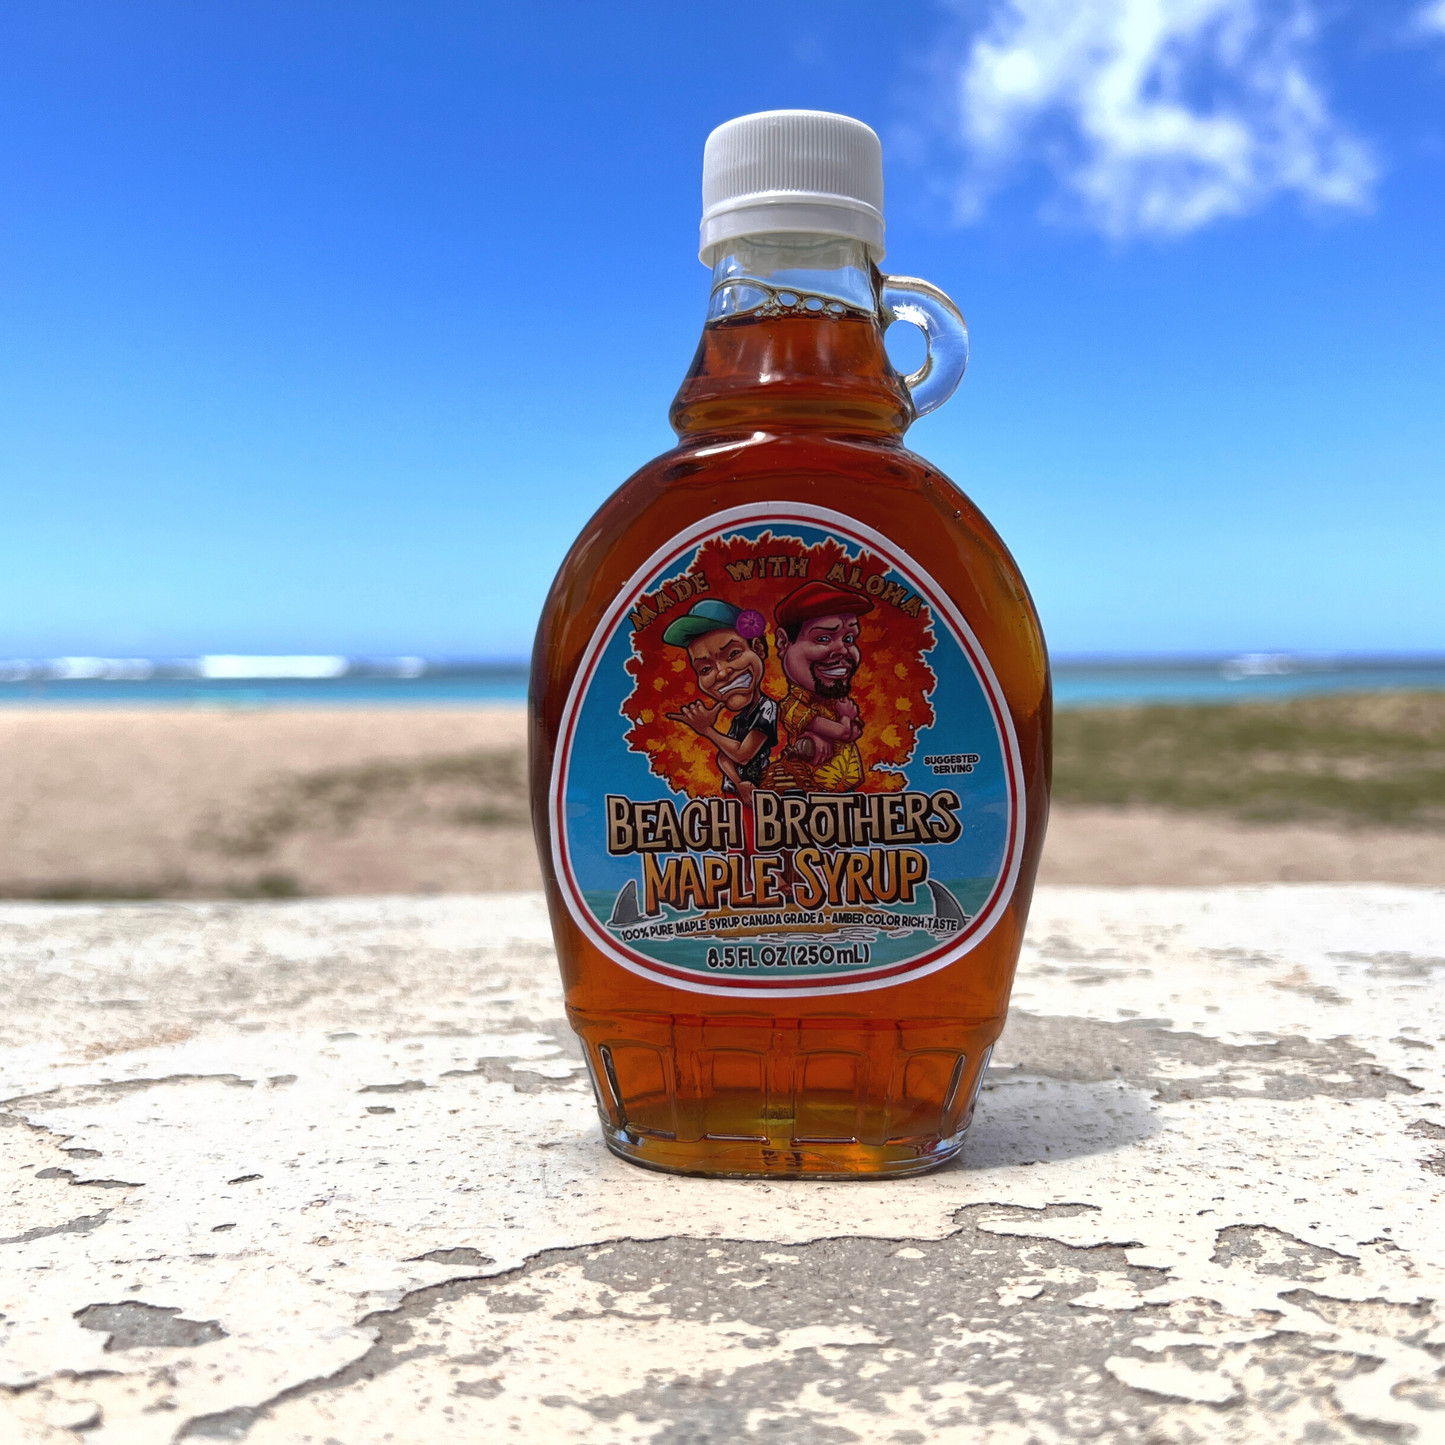 Beach Brothers Maple Syrup